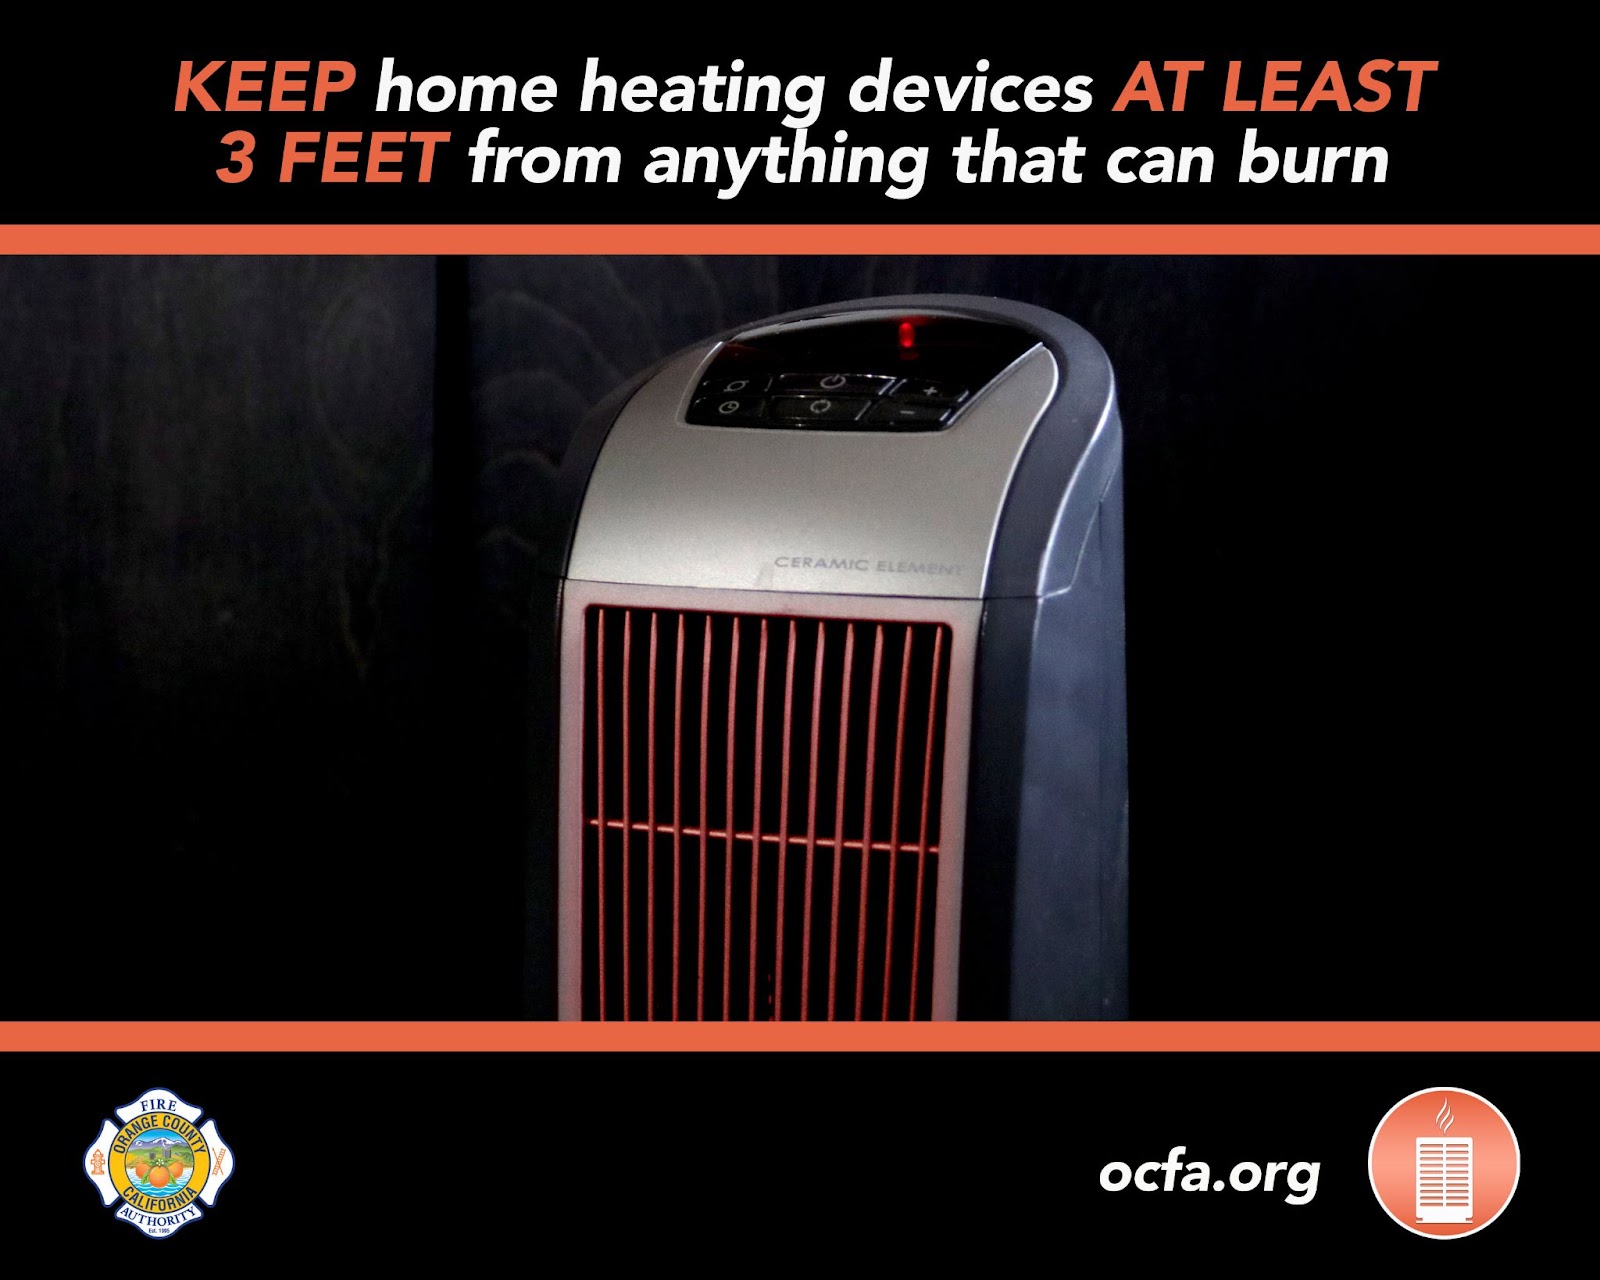 An image of an oscillating tower heater that said Keep home heating devices at least 3 feet from anything that can burn